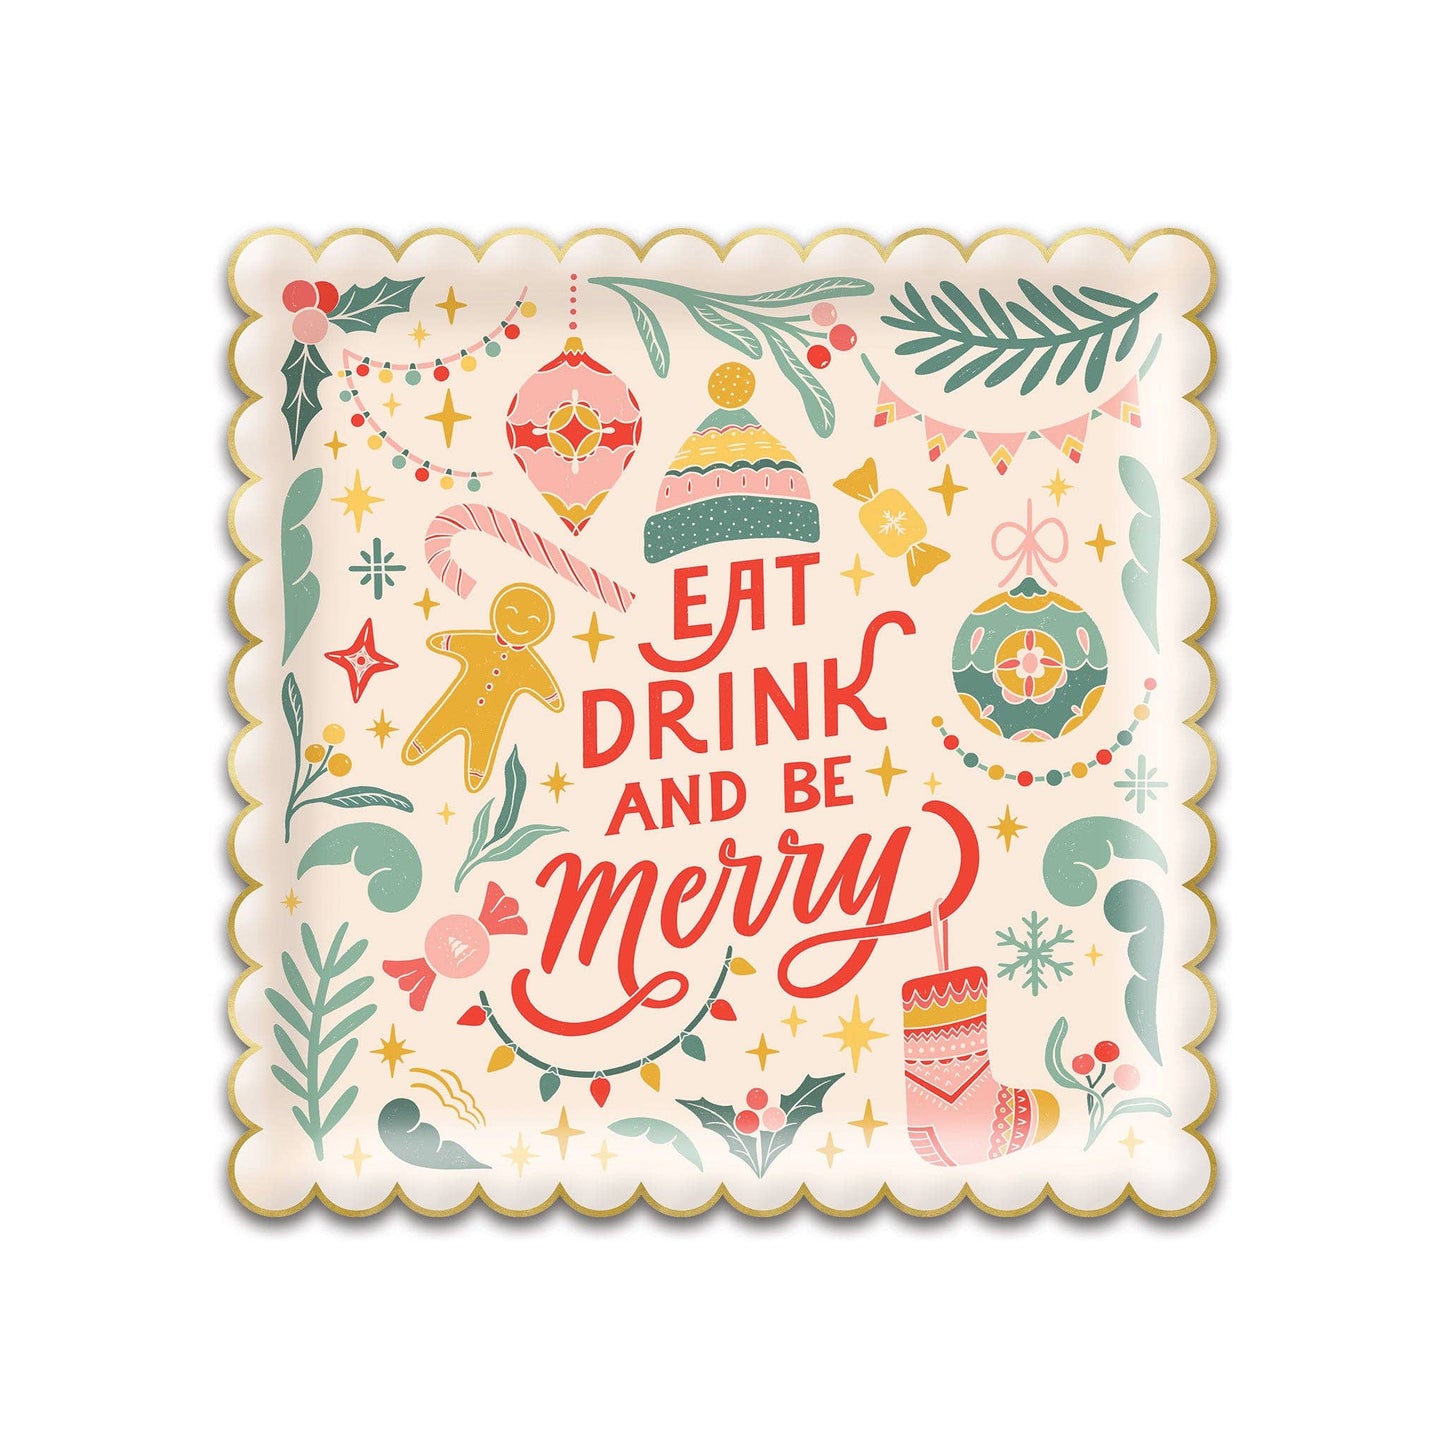 With retro holiday flair, these scalloped edges paper plates feature the merry sentiment "Eat, drink and be merry," and fun Christmas icons that will make your table the merriest place to be at your next Christmas party.